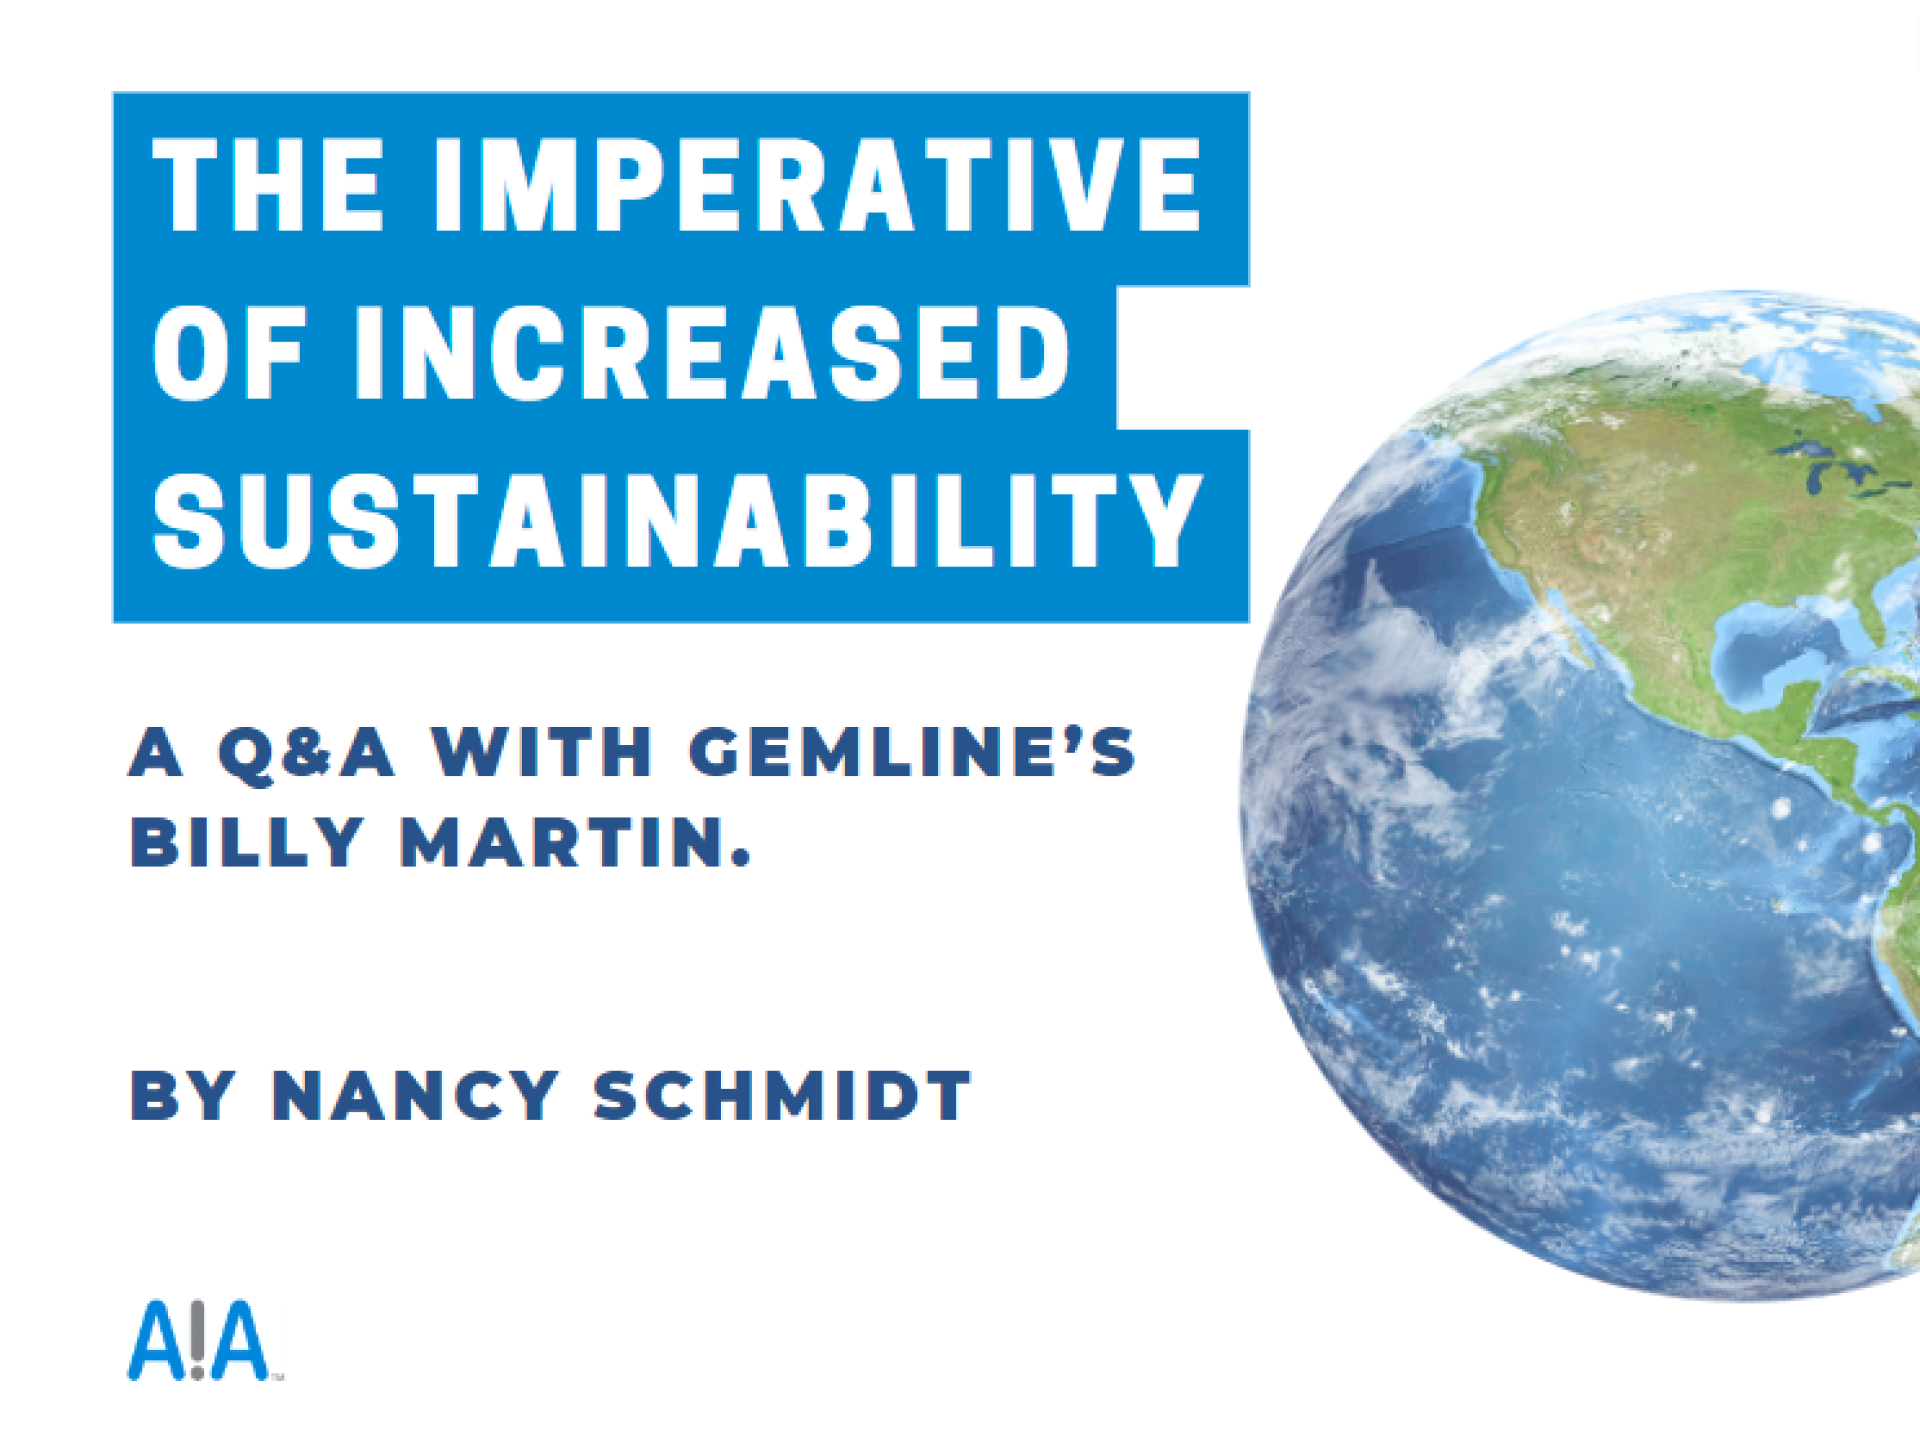 The Imperative of Increased Sustainability